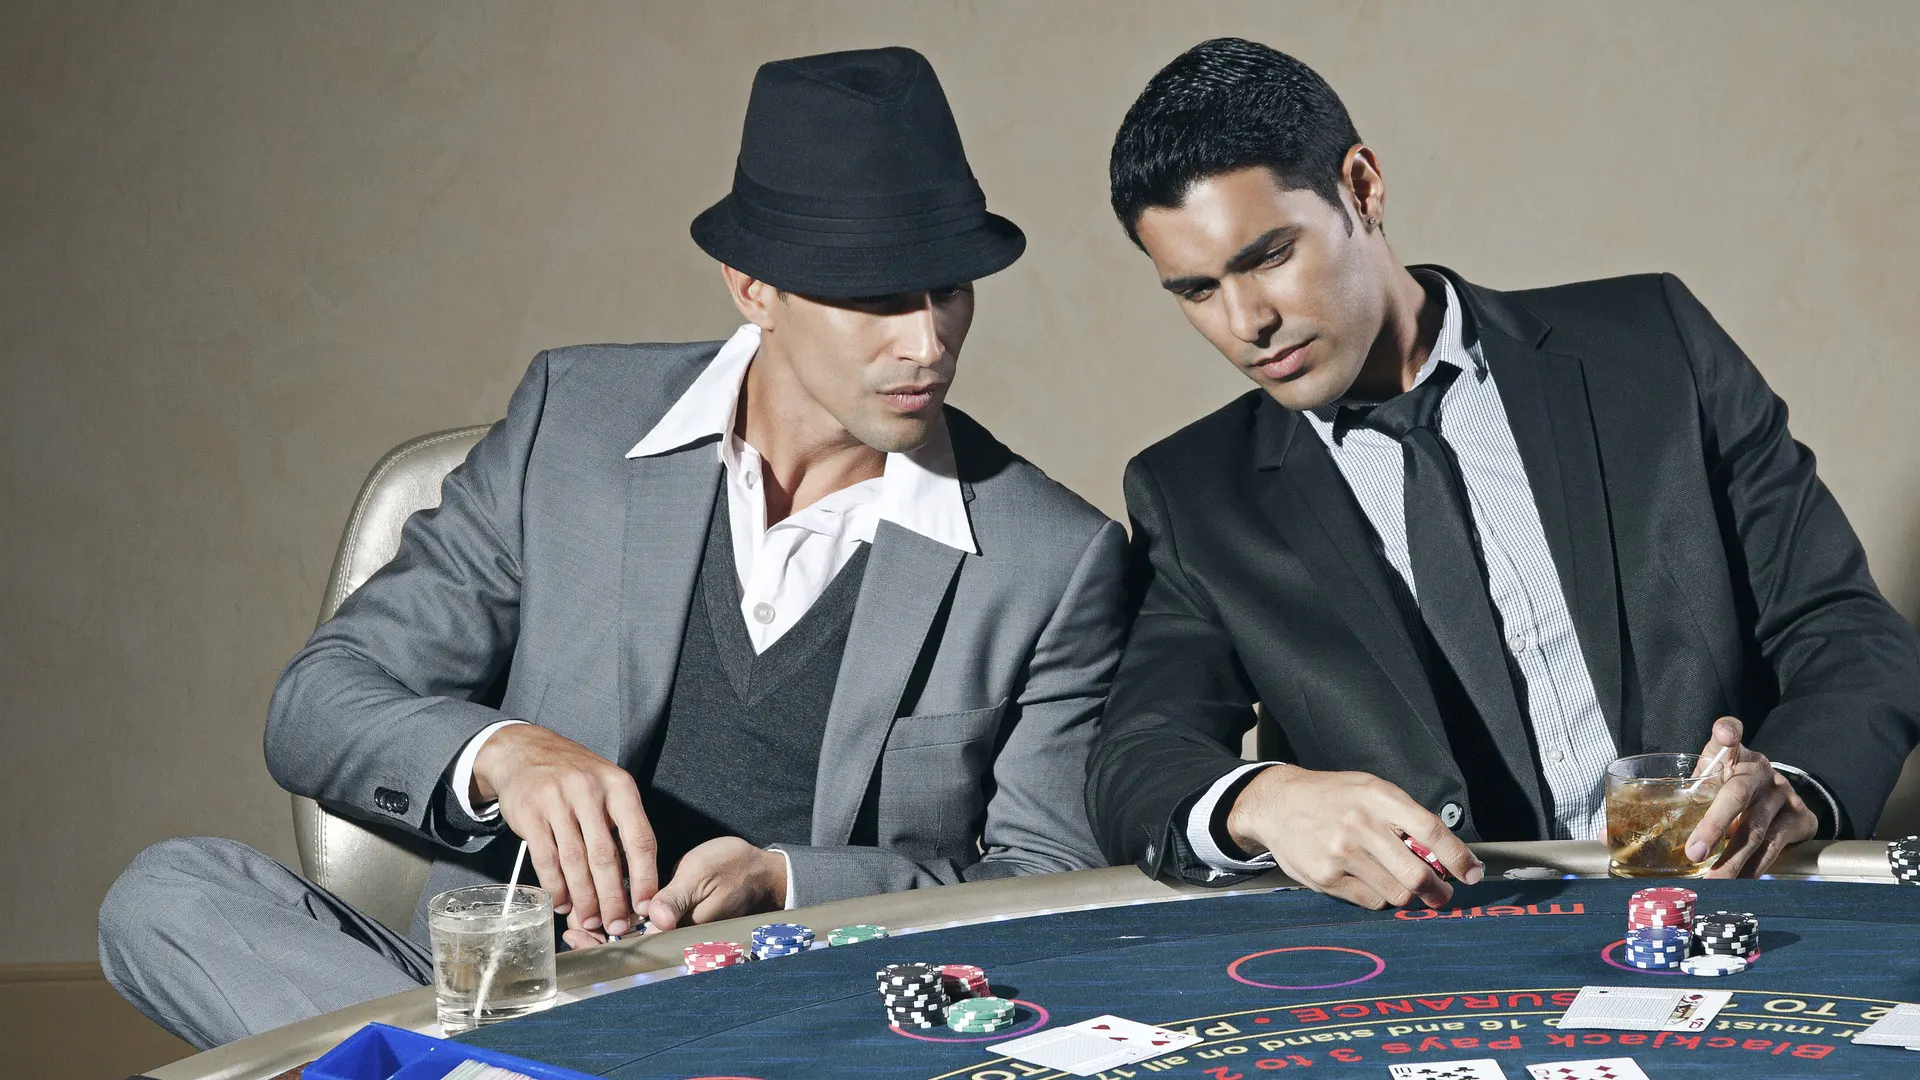 Dodgy casino players at a card table